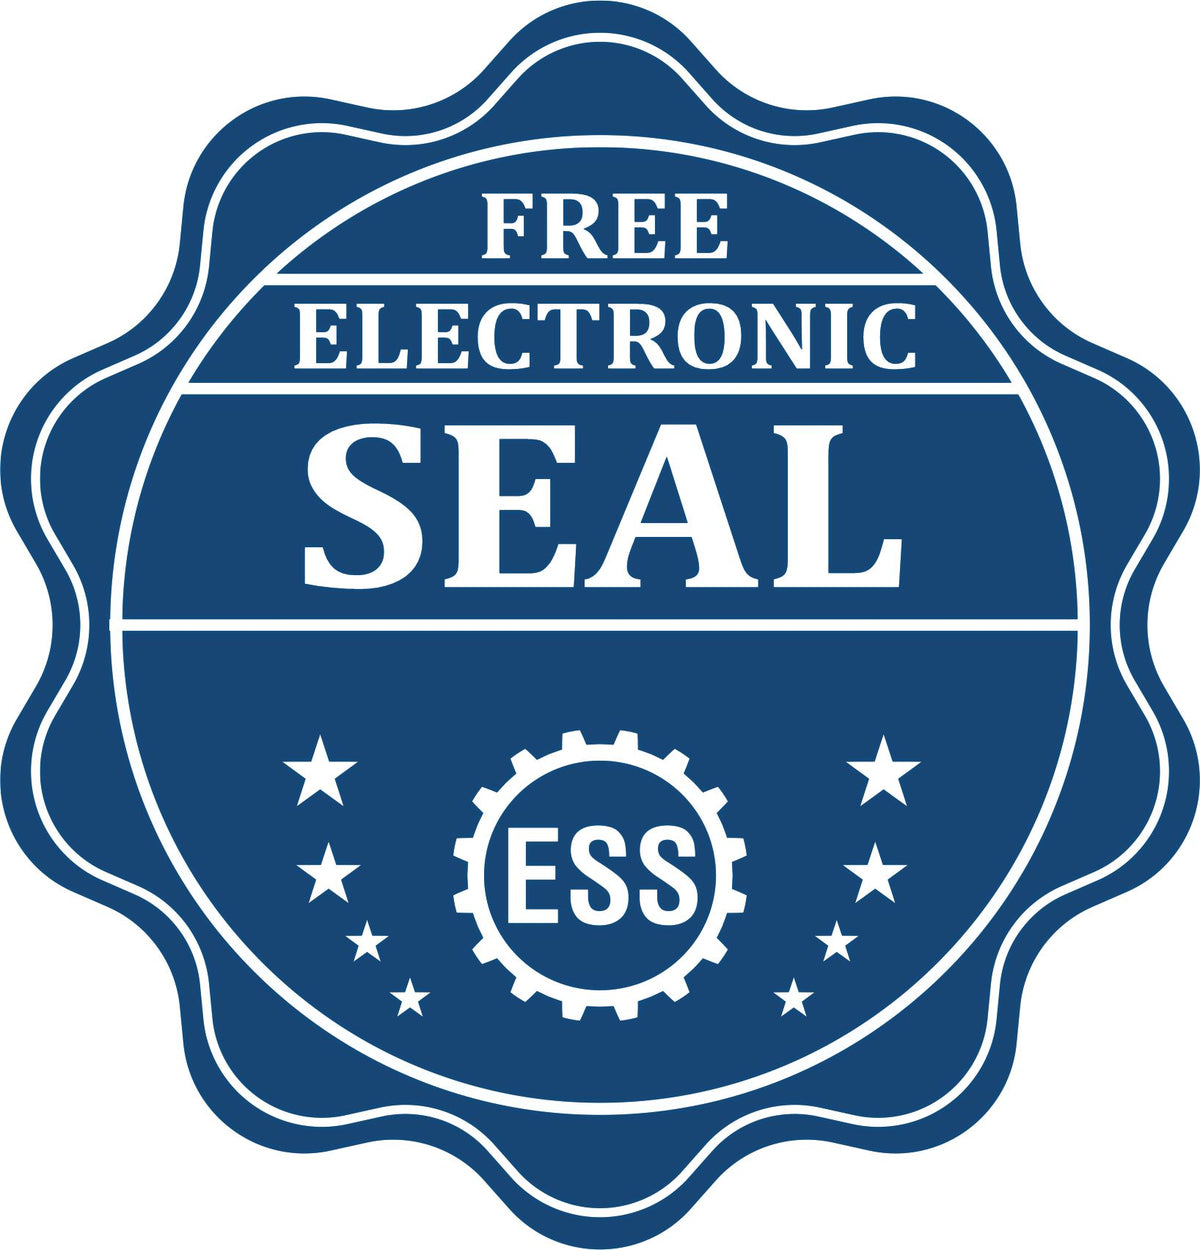 A badge showing a free electronic seal for the Soft Pocket Utah Landscape Architect Embosser with stars and the ESS gear on the emblem.